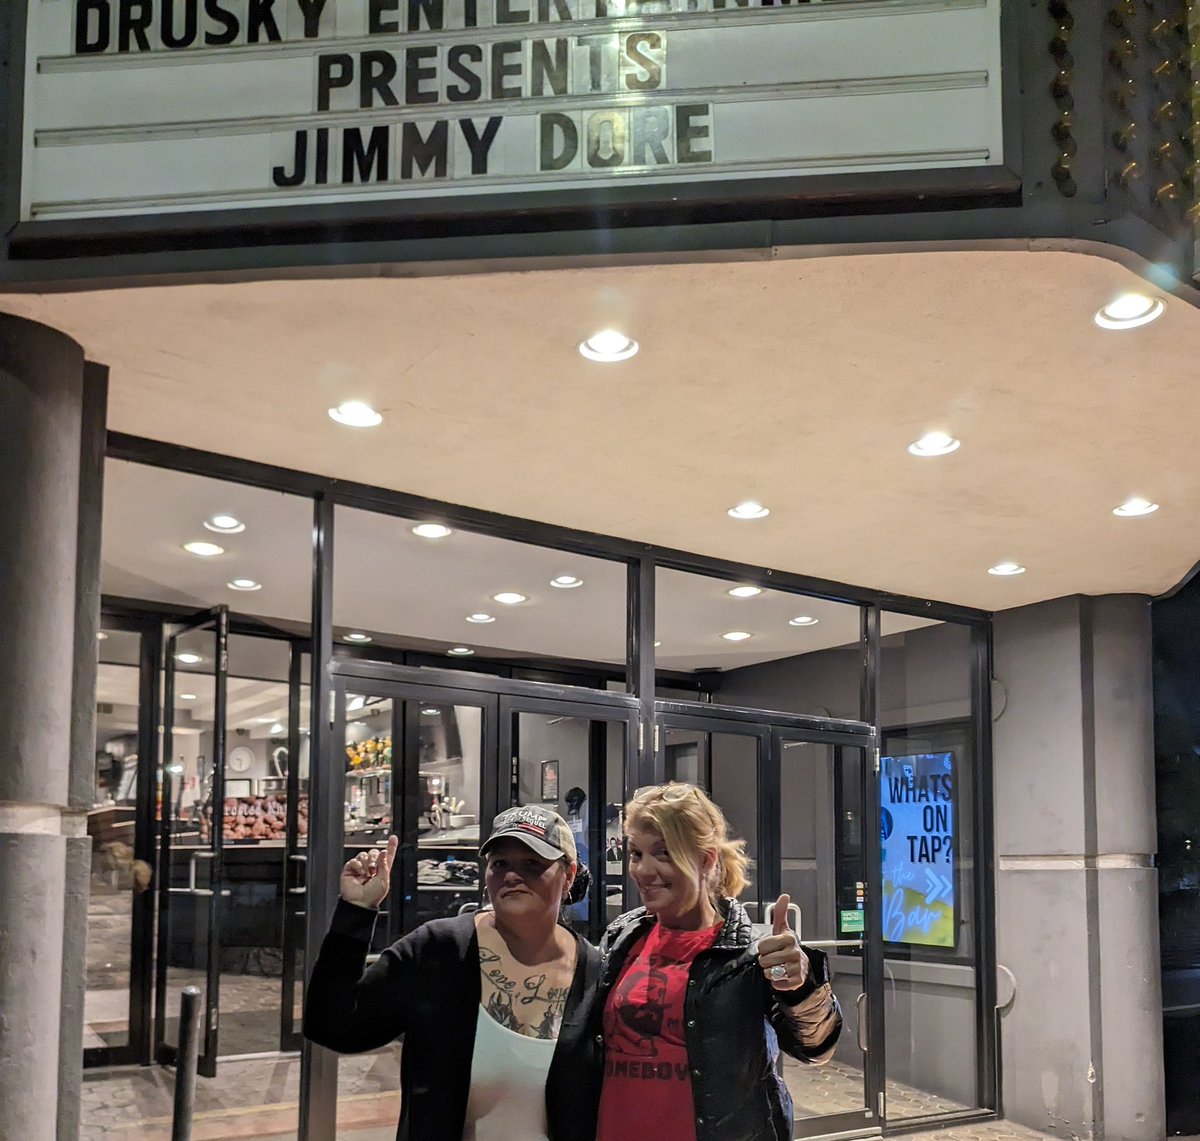 @jimmy_dore Kate in her Castro shirt. Me in my Trump hat: we loved the show!